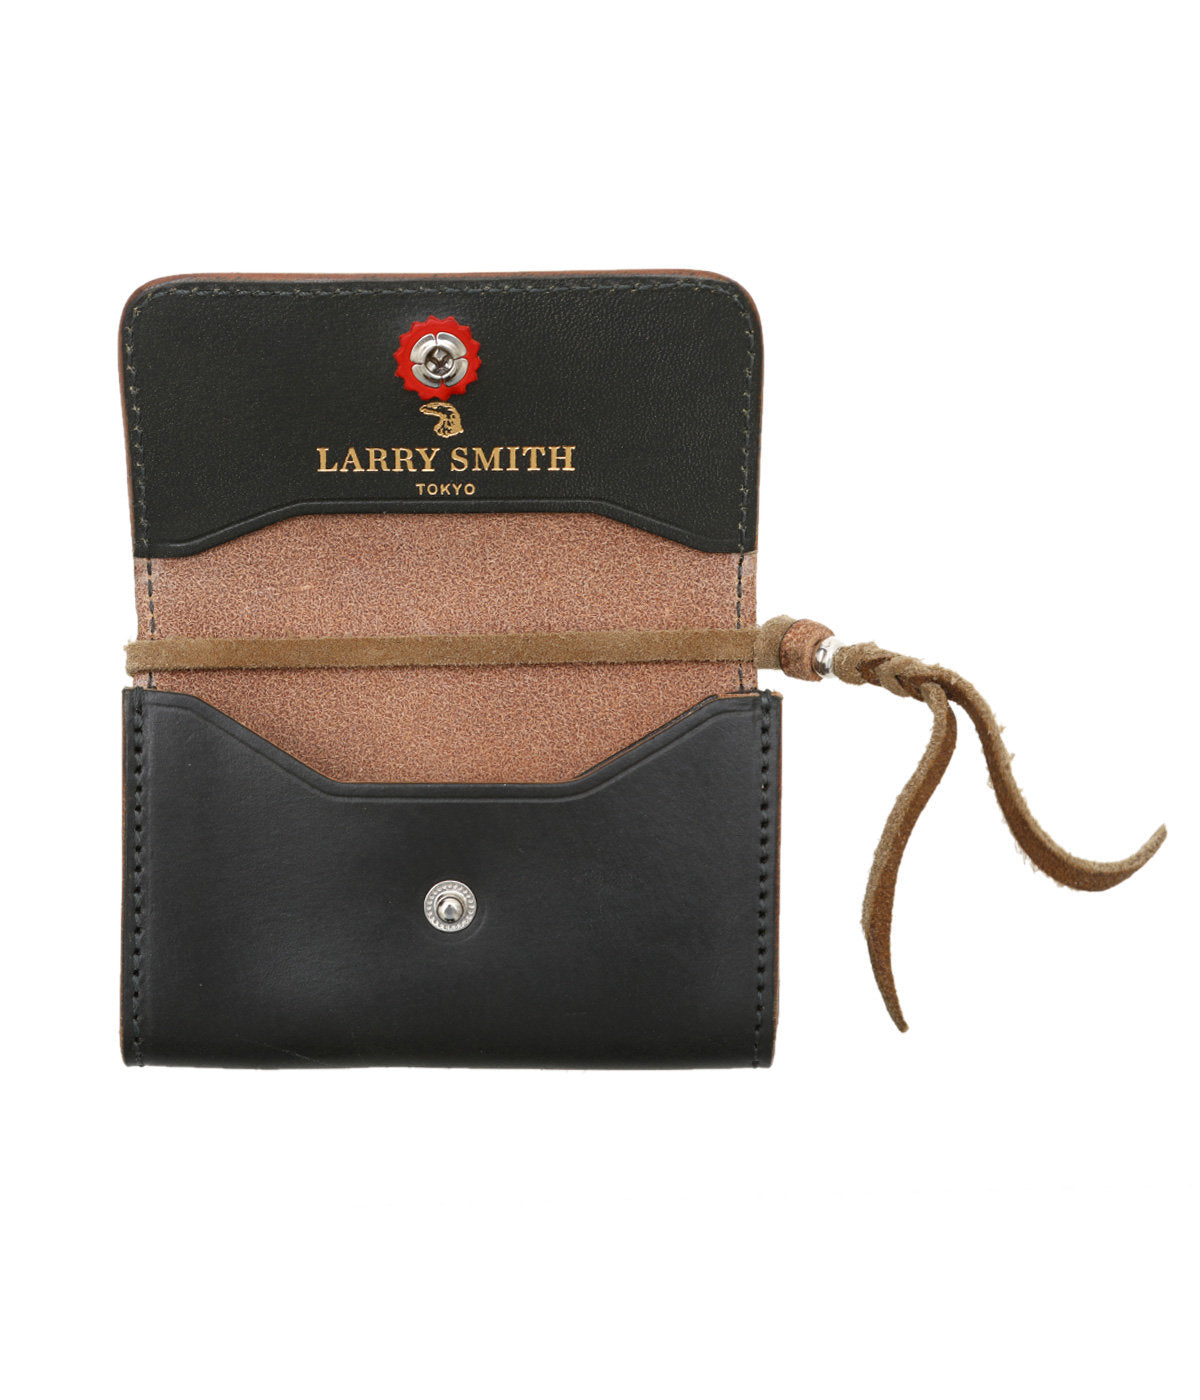 LARRY SMITH LIMITED CARD CASE – unexpected store